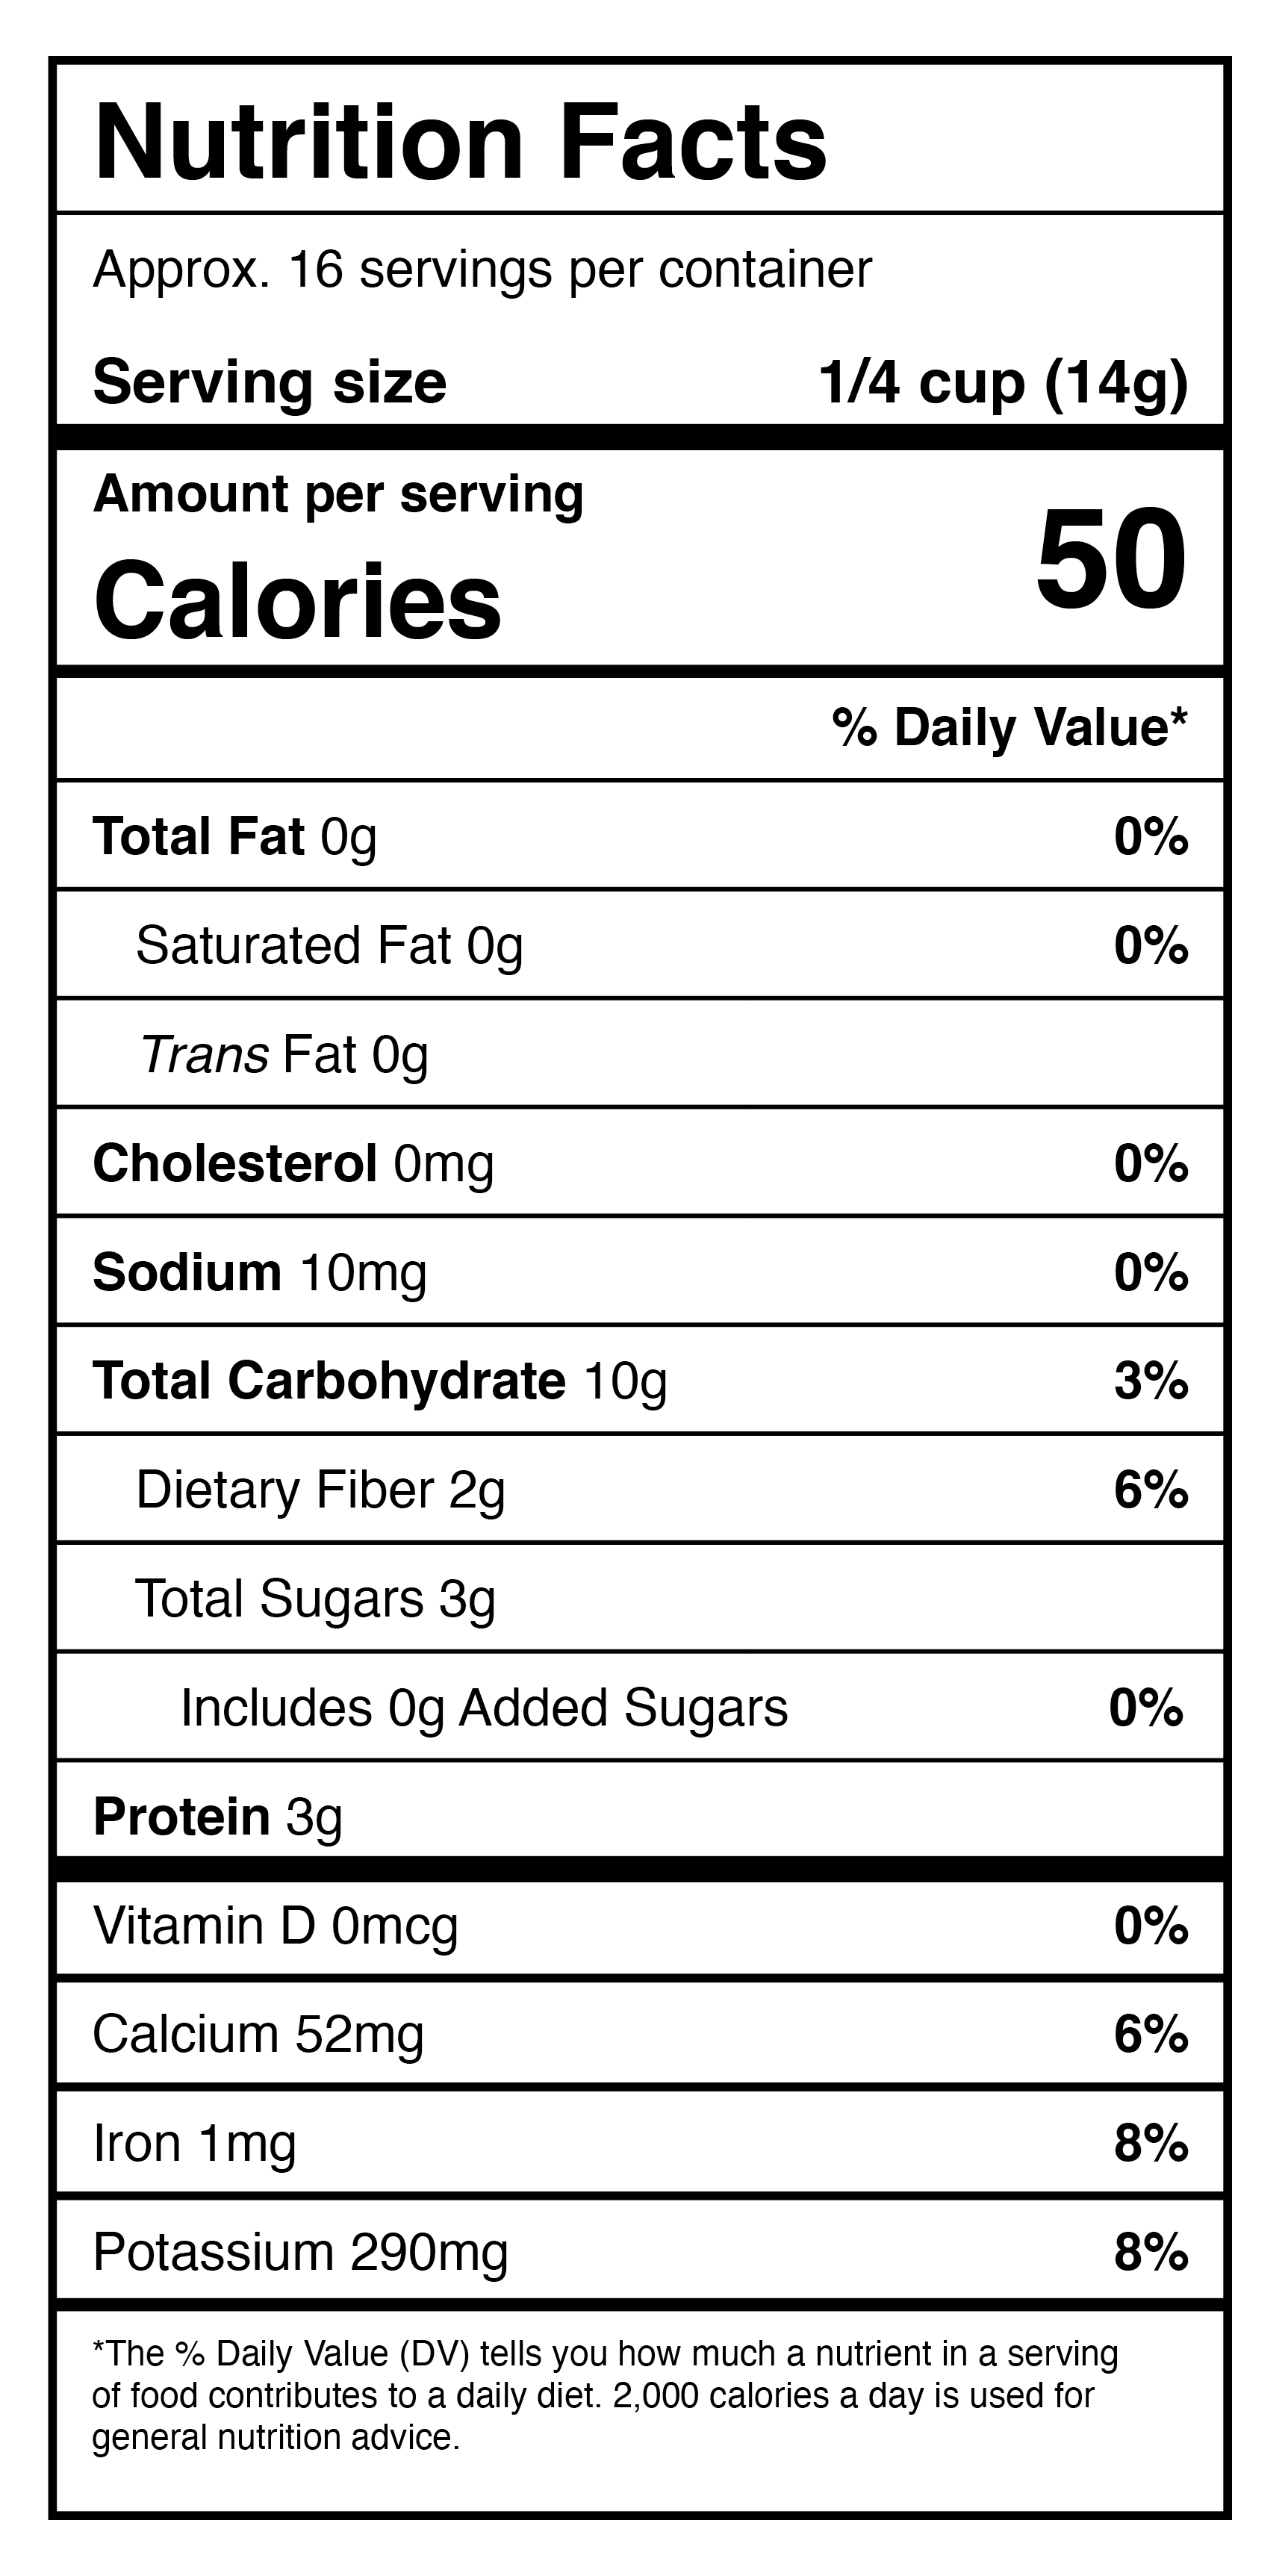 A nutrition label displaying the nutrition facts of Harmony House Dried Green Beans (8 oz) - (SHIPS IN 1-2 WEEKS).